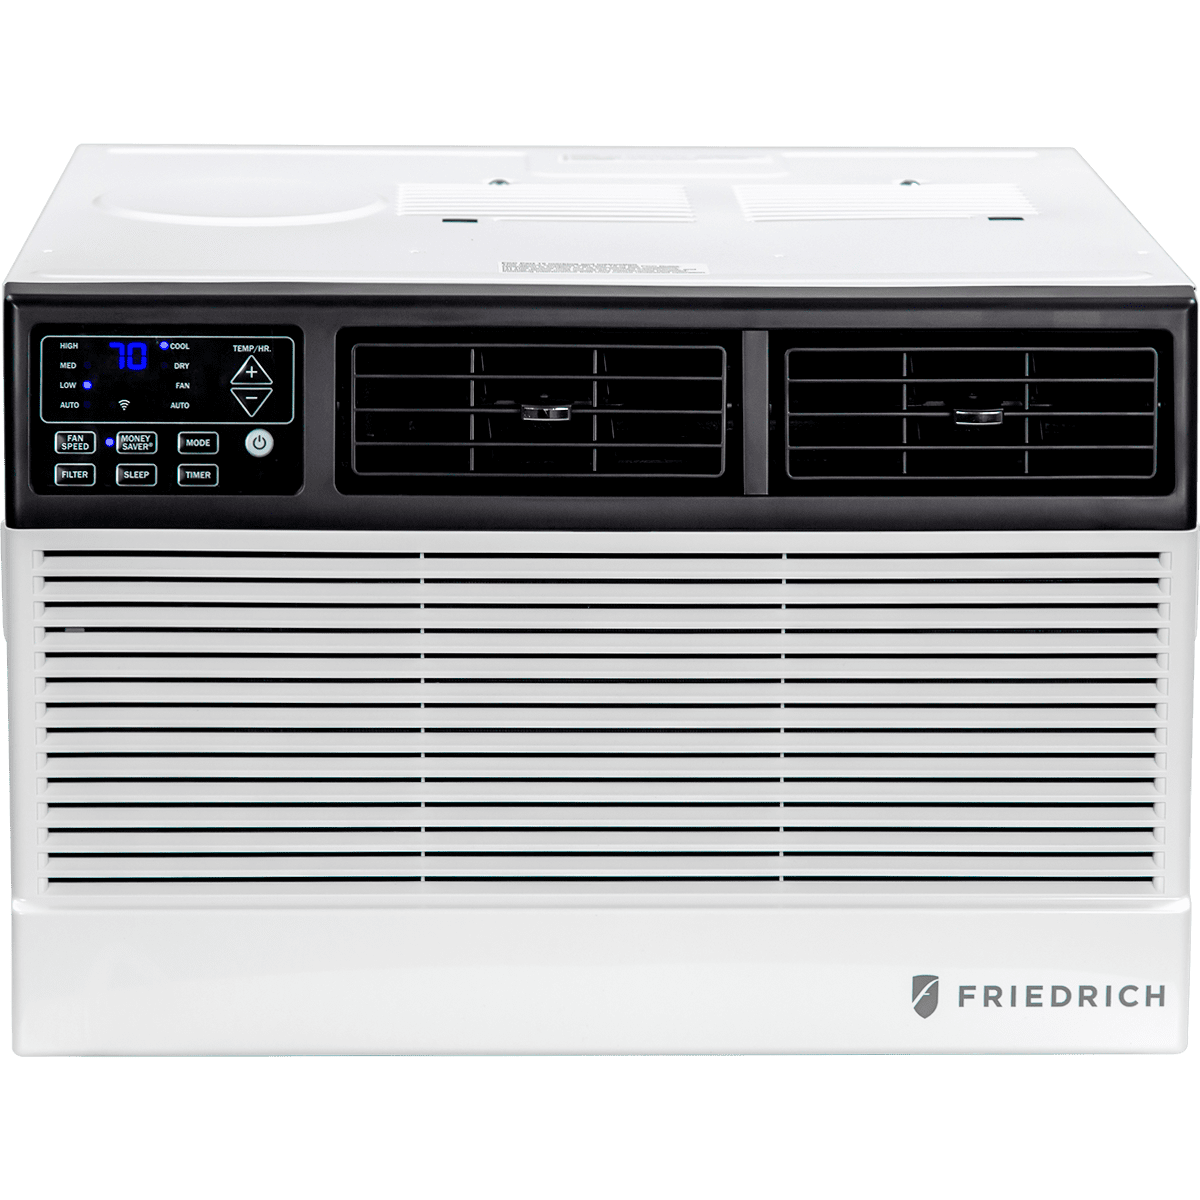 friedrich air conditioner model numbers